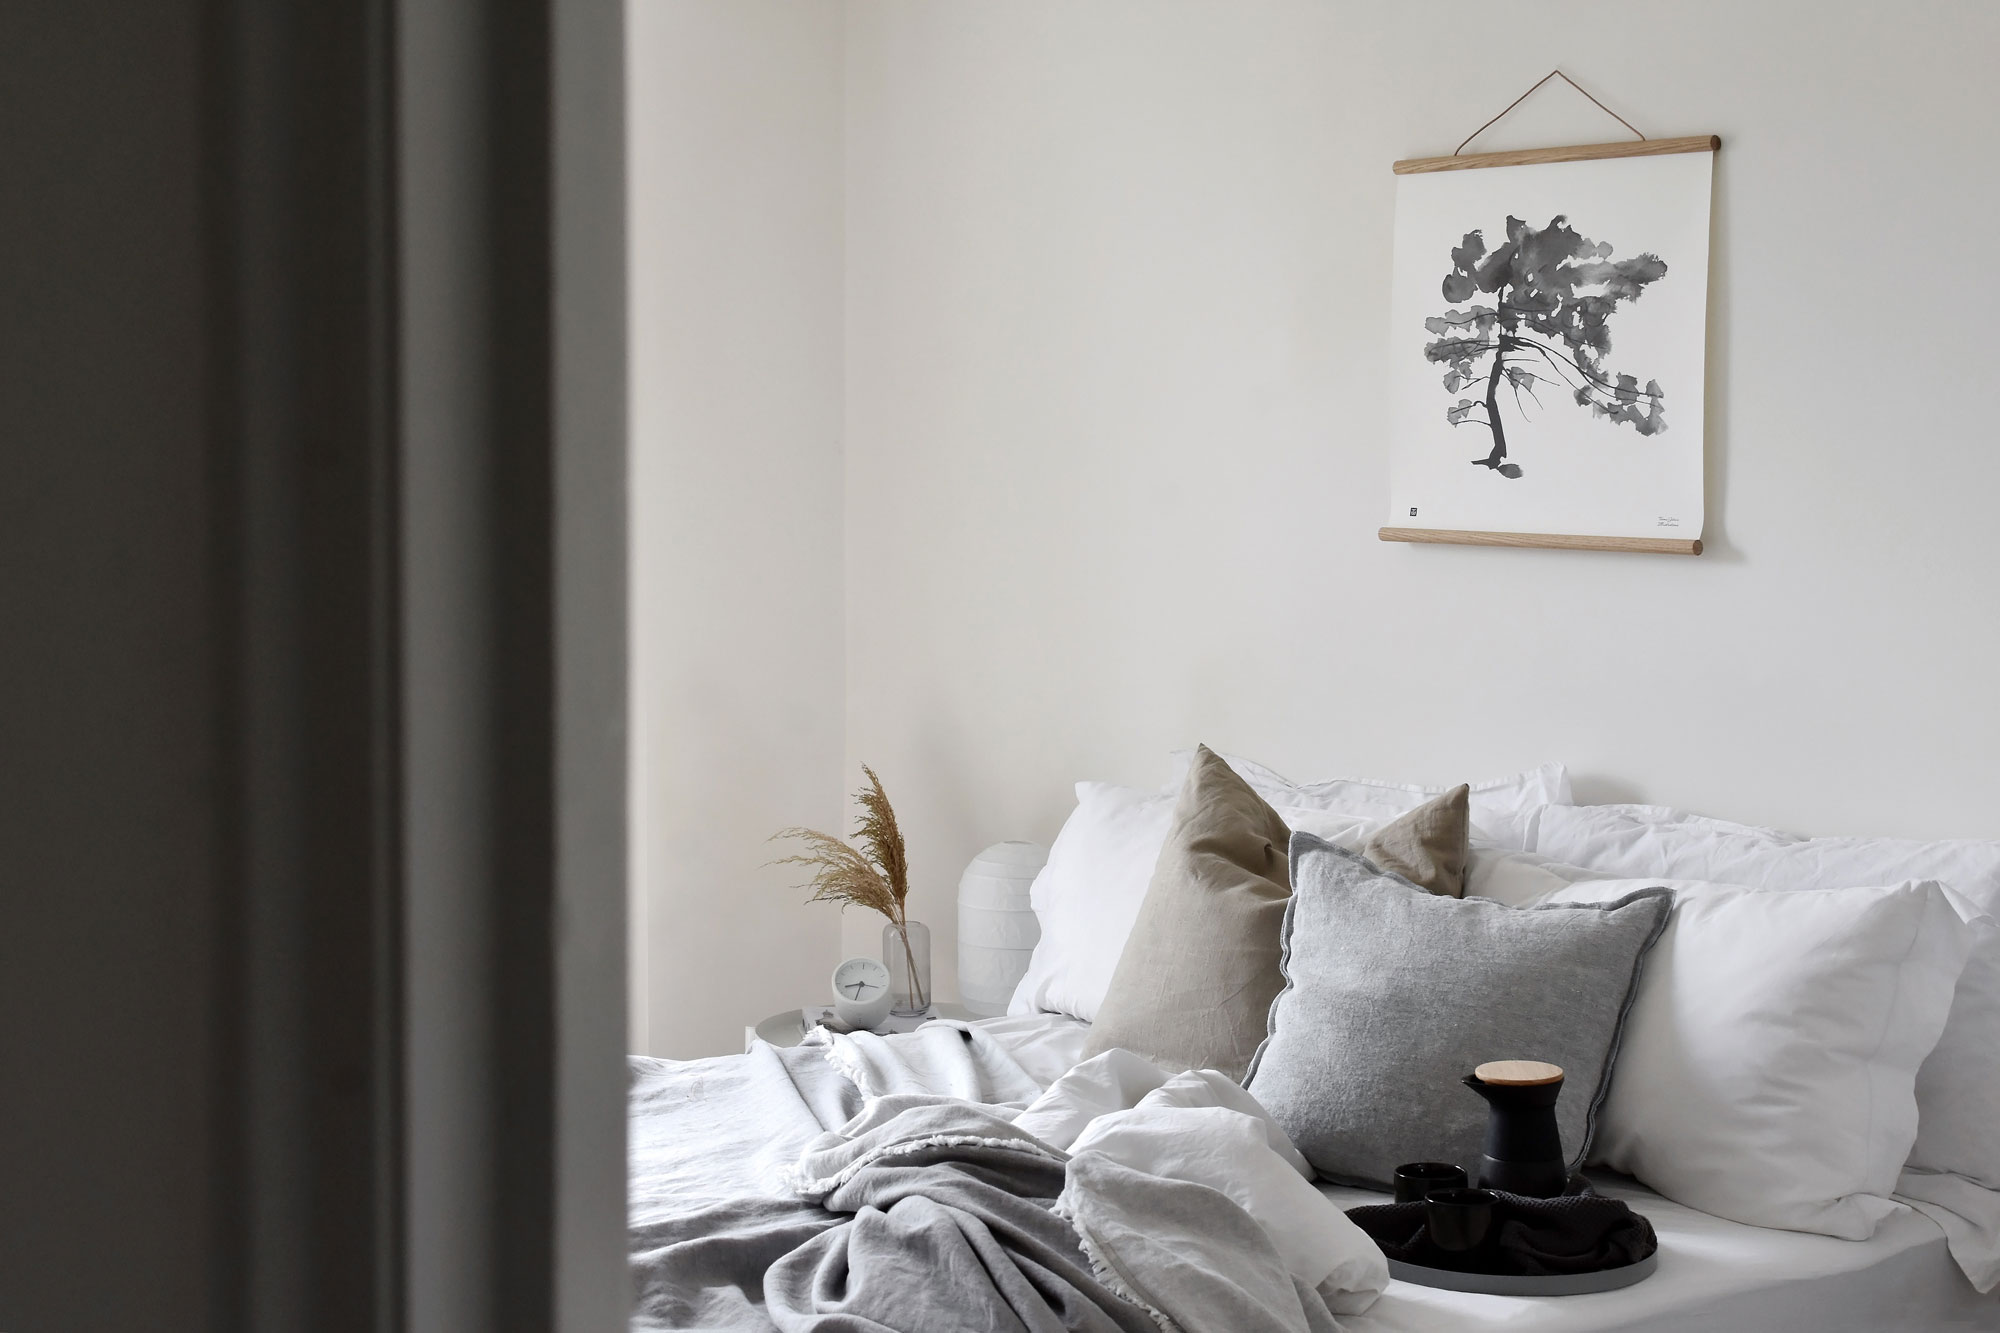 A guest bedroom wall-art update with NØRDIK | These Four Walls blog